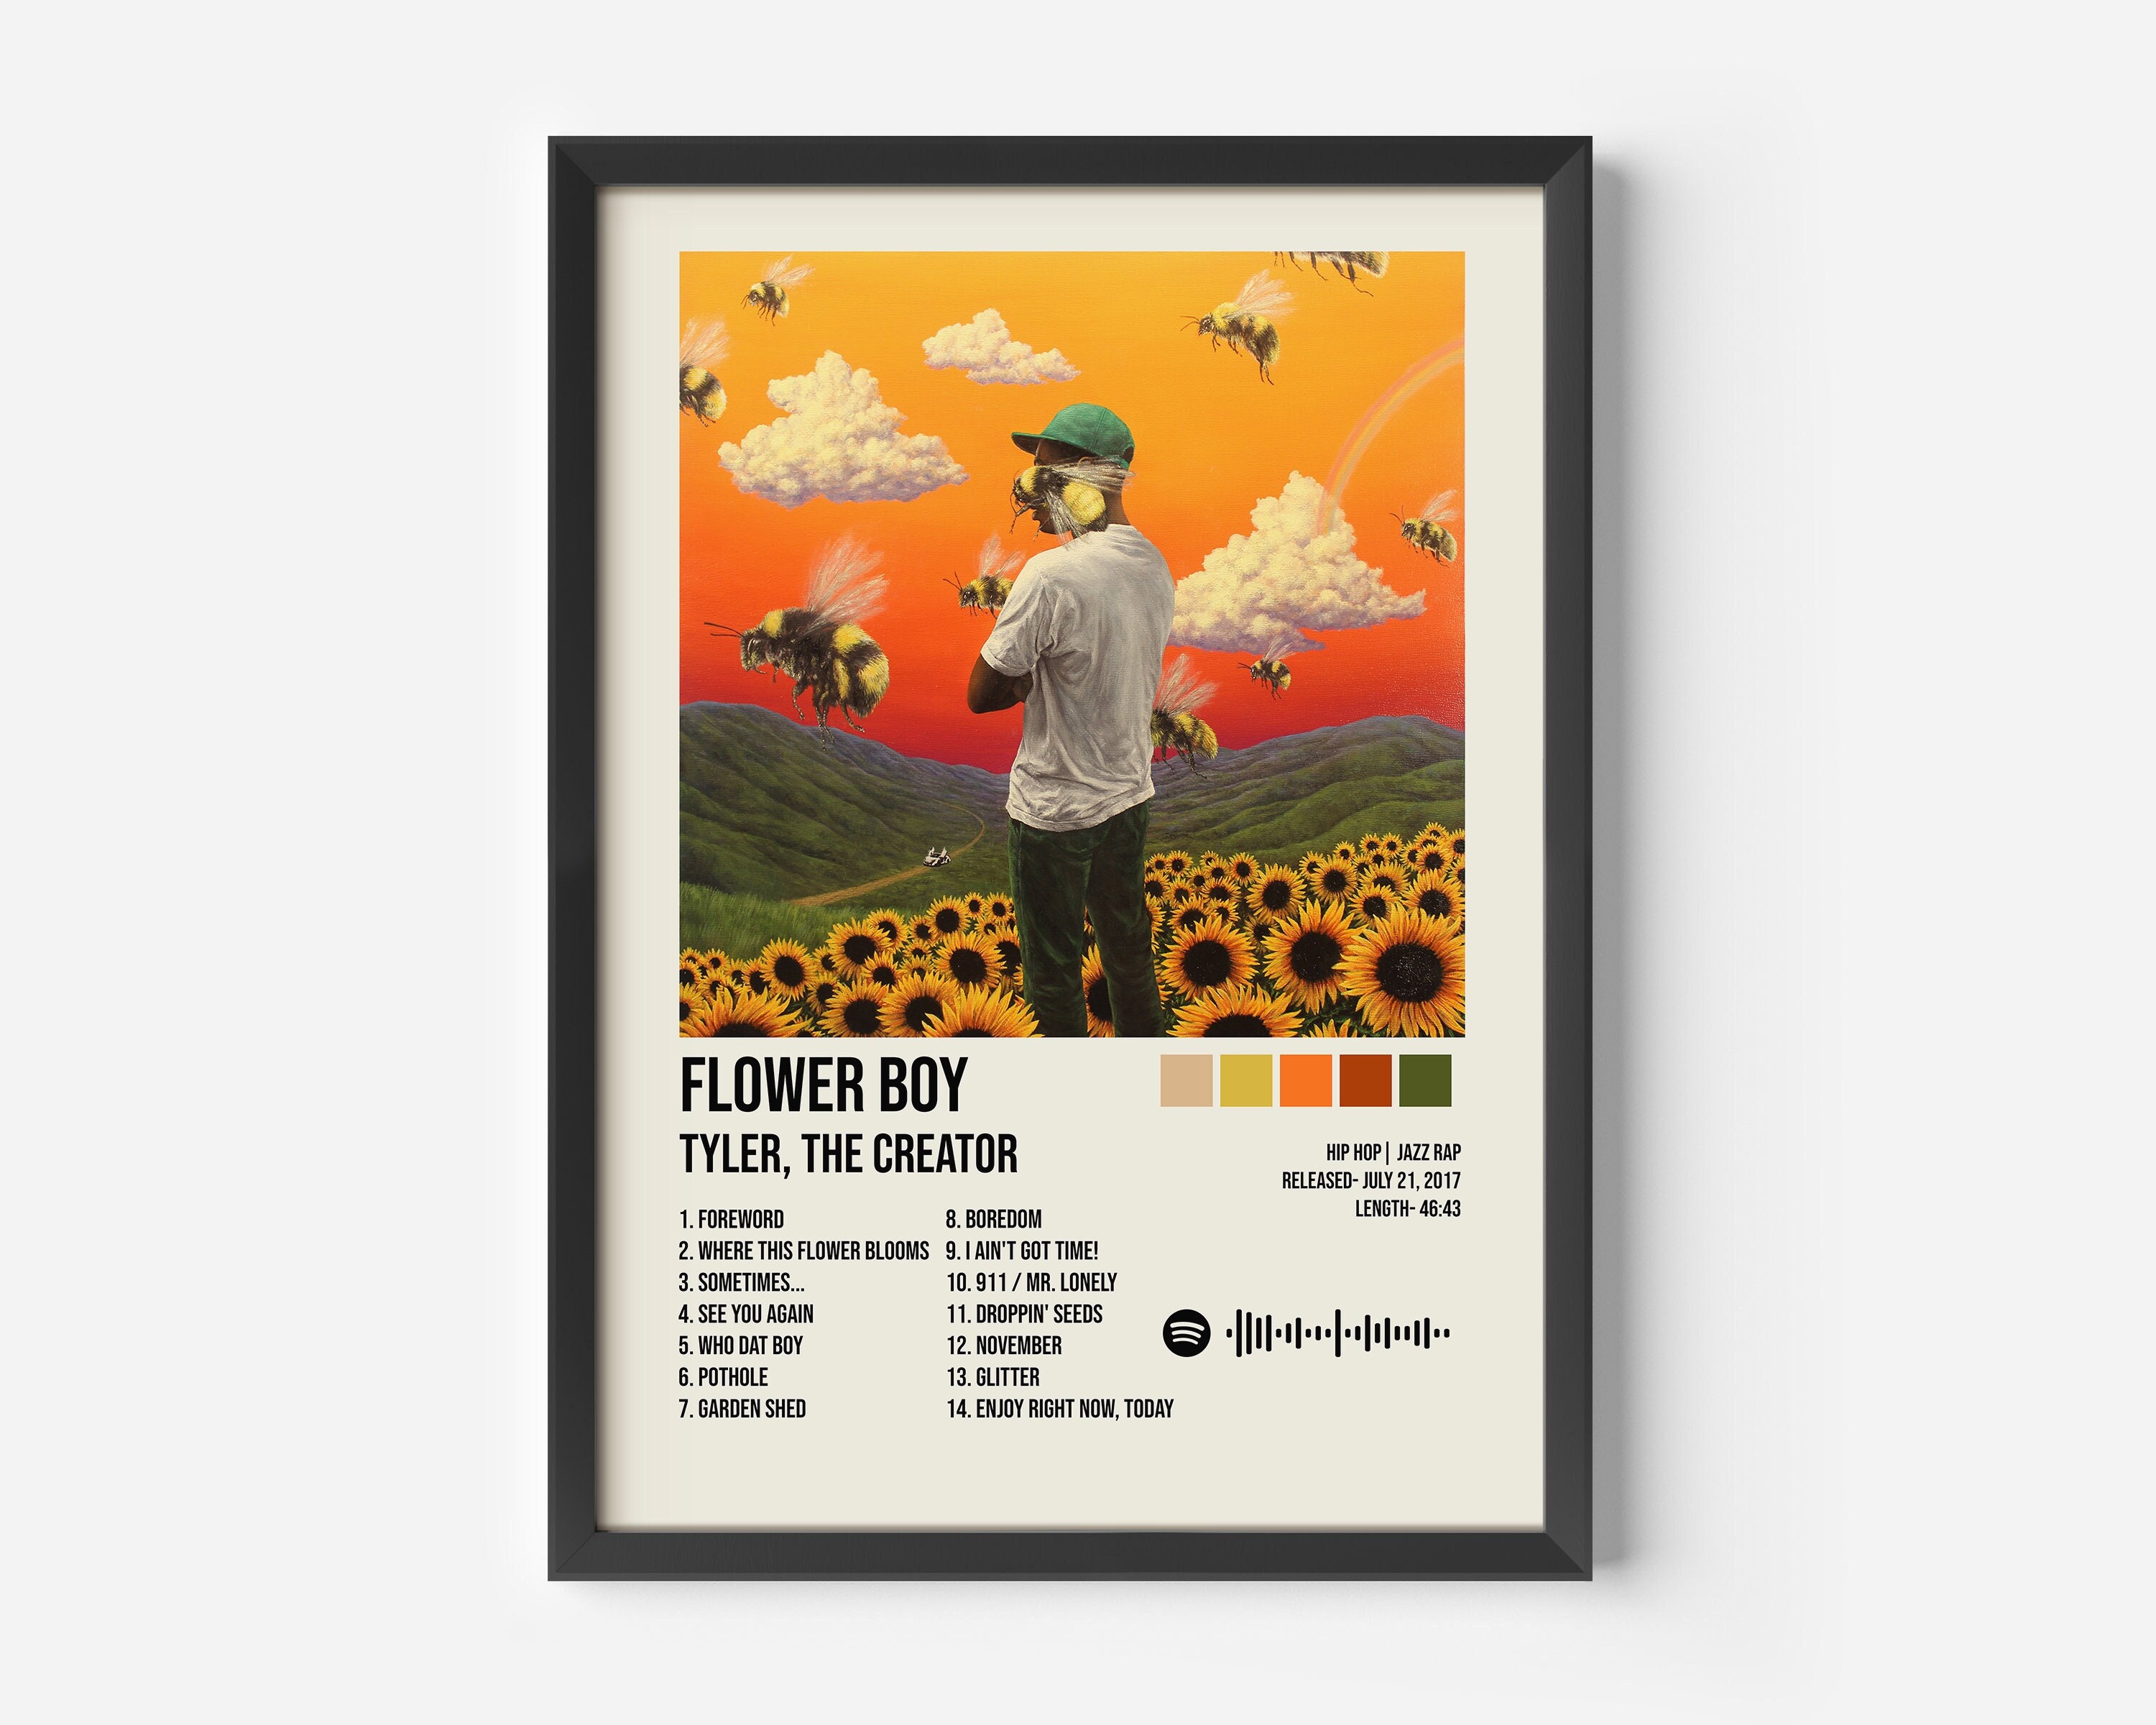 Tyler the Creator Wolf Hat Laminated & Framed Poster (36 x 24) 